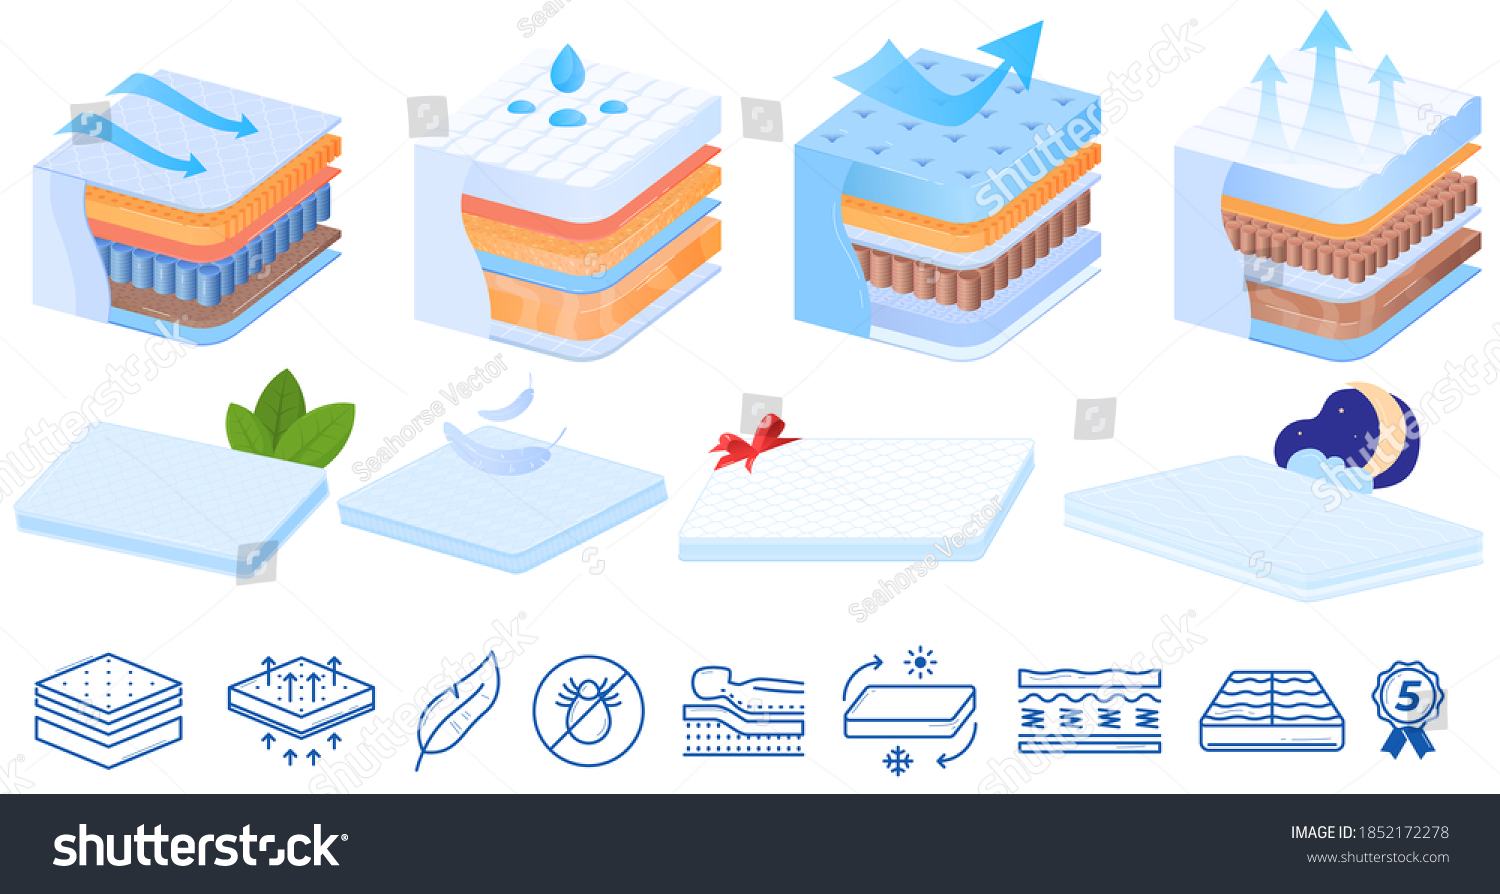 SVG of Orthopedic mattress fillers icons set vector illustrations. Orthopedical, foam, latex, breathable and dual season, ecological mattress with removable cover, pillows and award medal. Ortho logos. svg